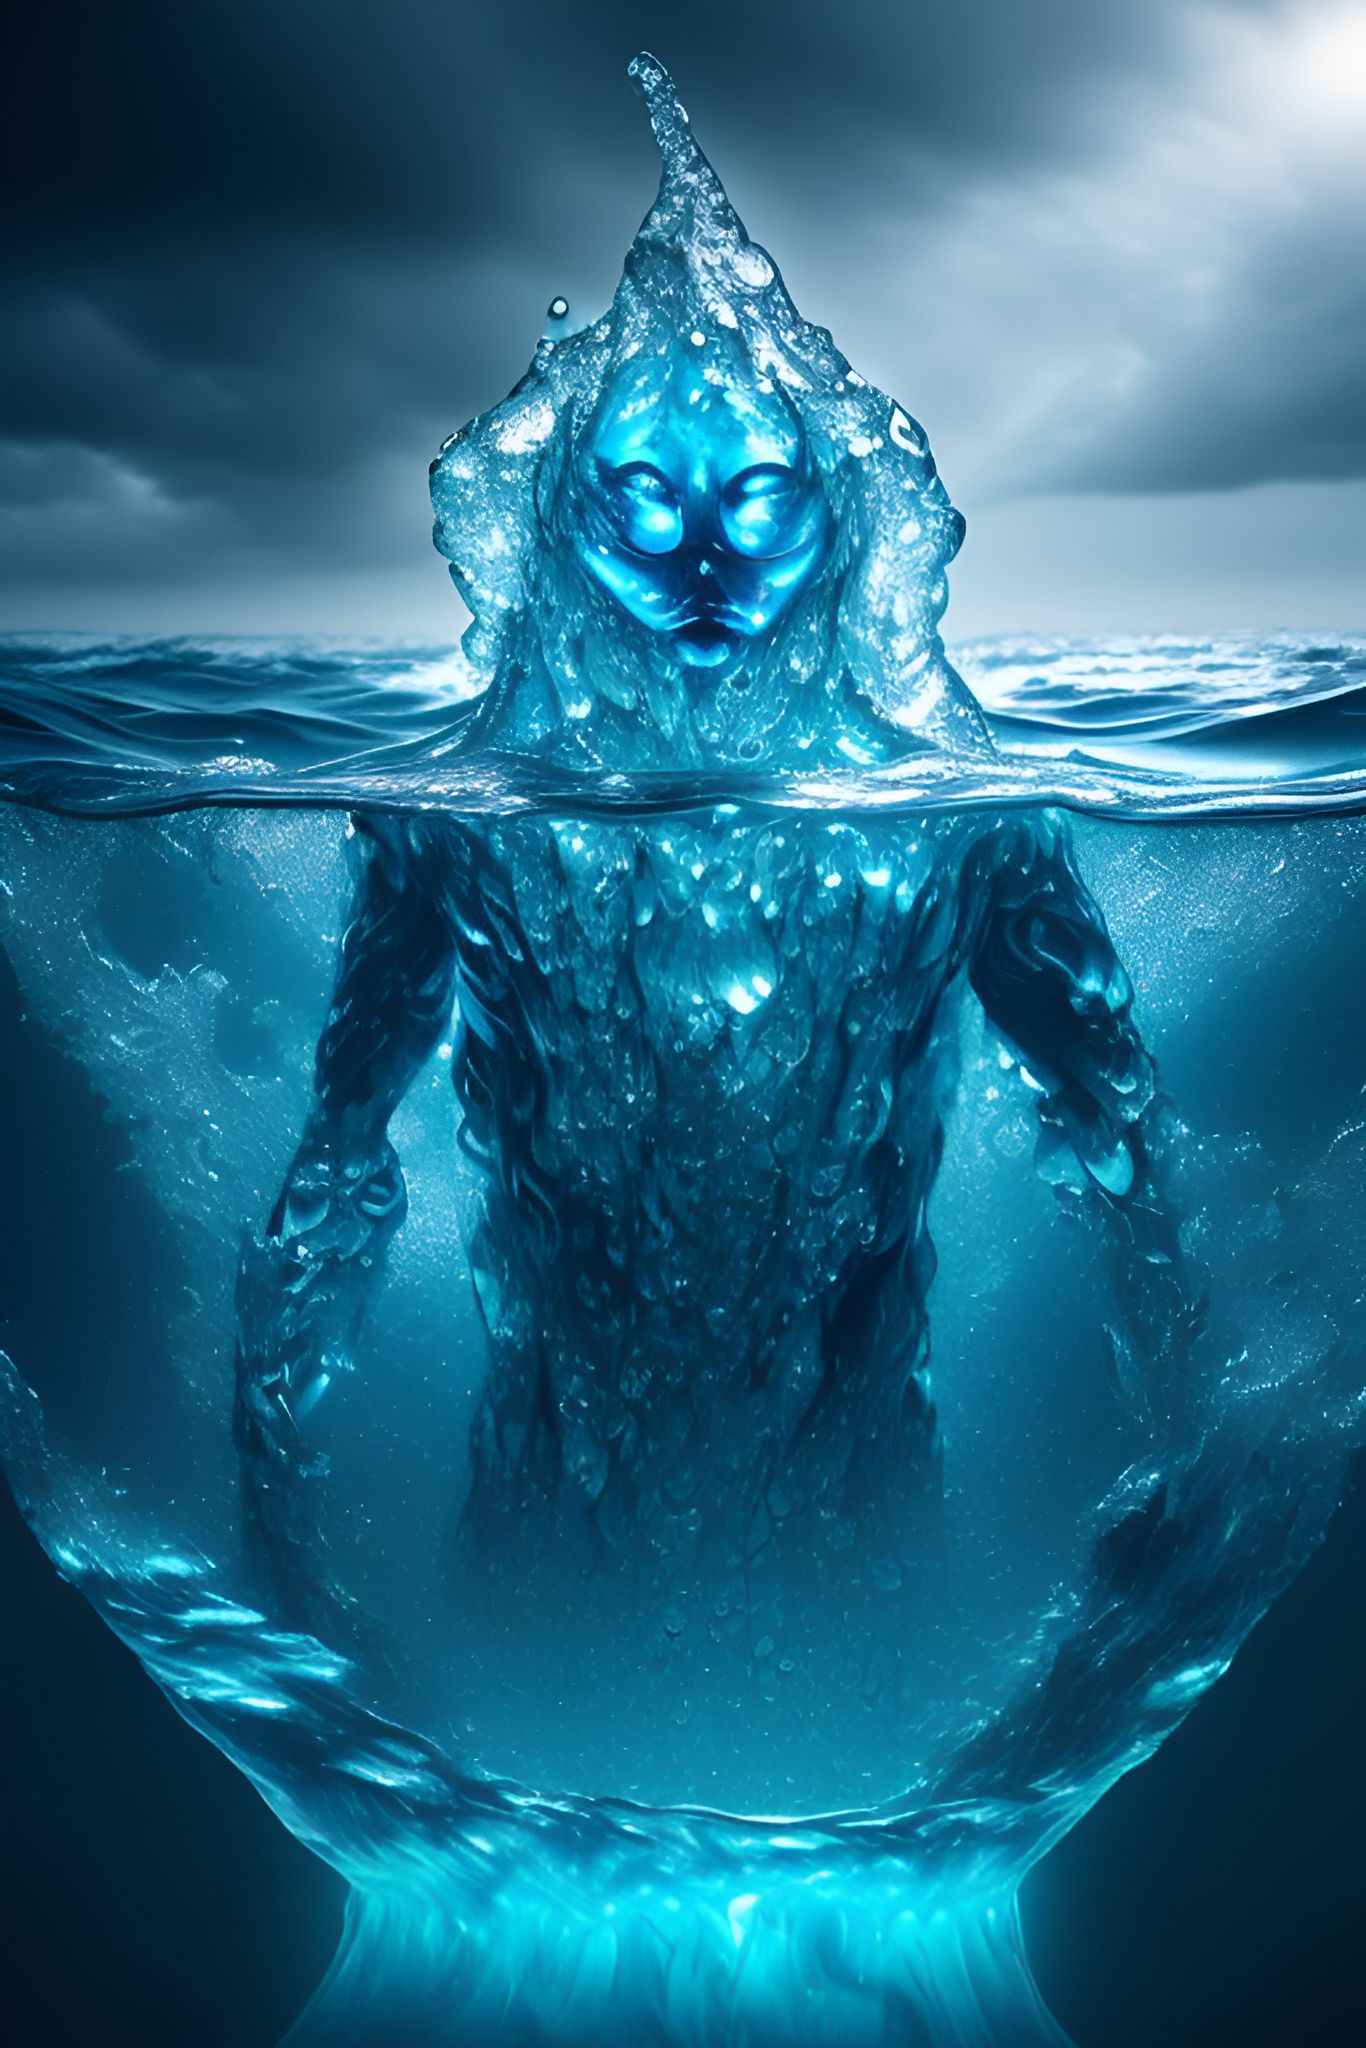 dnd water elemental, 12k resolution, Photo realistic, 35mm f1.8 zeiss lens, by irmgard karoline becker despradel, Studio lighting, high face detail, Depth of field, sony a7 iv, Cinematic, full body dnd water elemental. a creature that embodies the essence of crystal clear water, taking the form of a ((humanoid figure)) ((composed entirely of fluid)) with ((a face and sunken eyes)) emerging from the waves to fight a pirate ship. His elemental watery body is translucent, refracting light and creating a mesmerizing display of blues and dark blues. Droplets of water occasionally break free from its form. As it moves, the water elemental emits a soft, ambient glow., ultra-detailed, dramatic shot, ultra realism, immersive realism, realistic water effects, stormy sea background, Fantasy, Ethereal